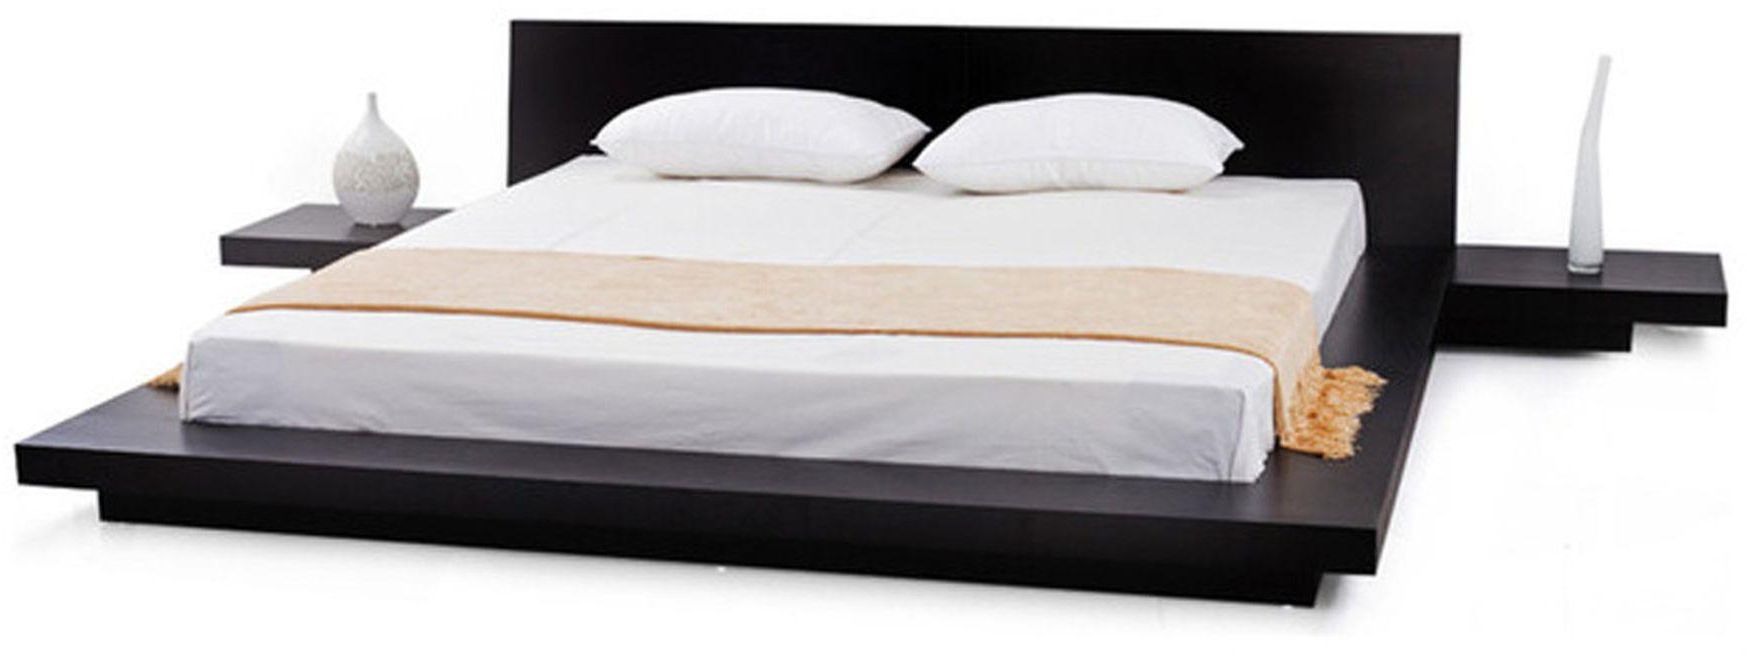 ZR HIZA-6-BY-6-BED-FRAME (DELIVERY:Lagos